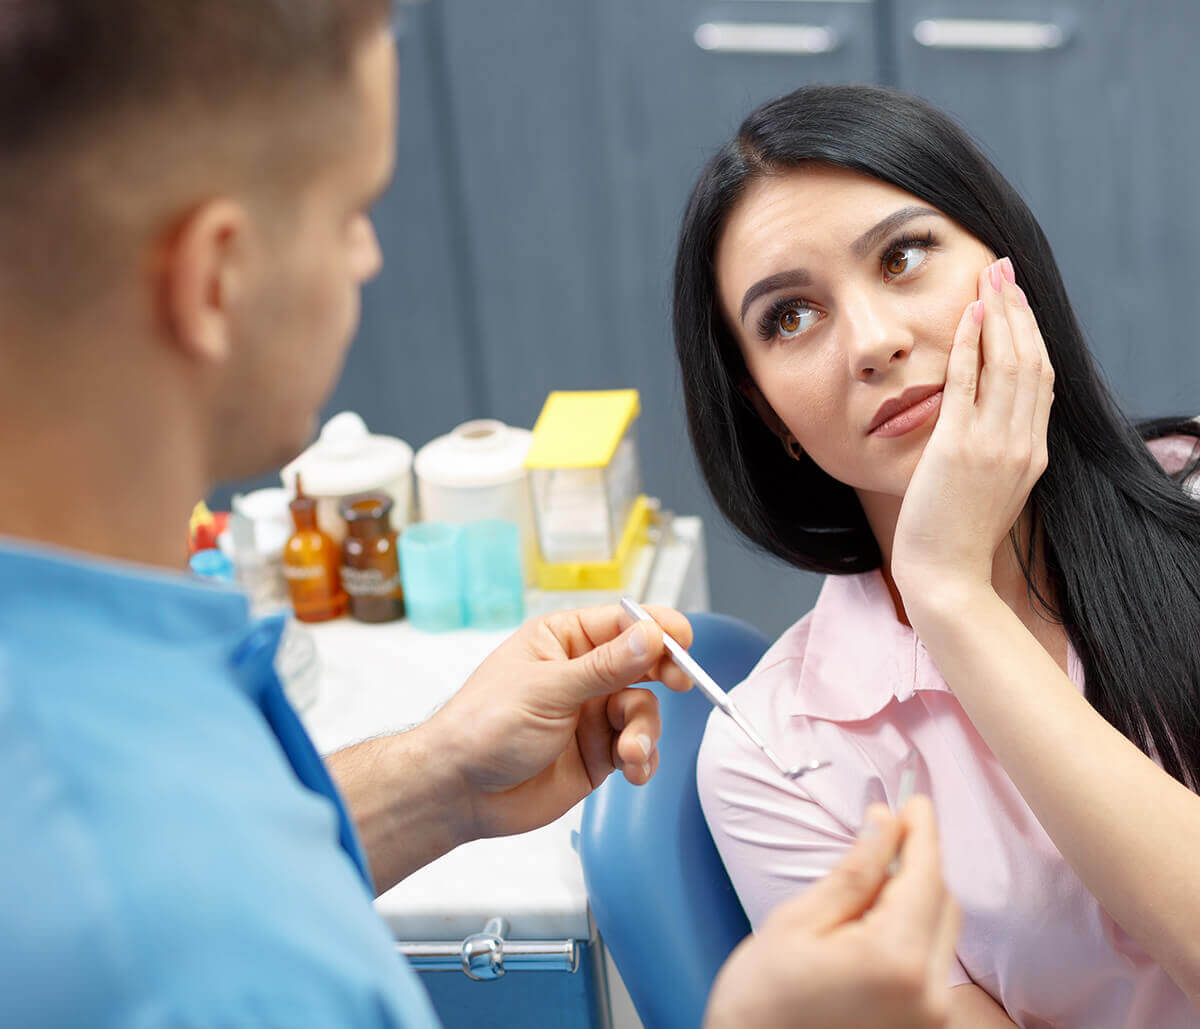 Painless Wisdom Tooth Extraction in Houston Texas Area